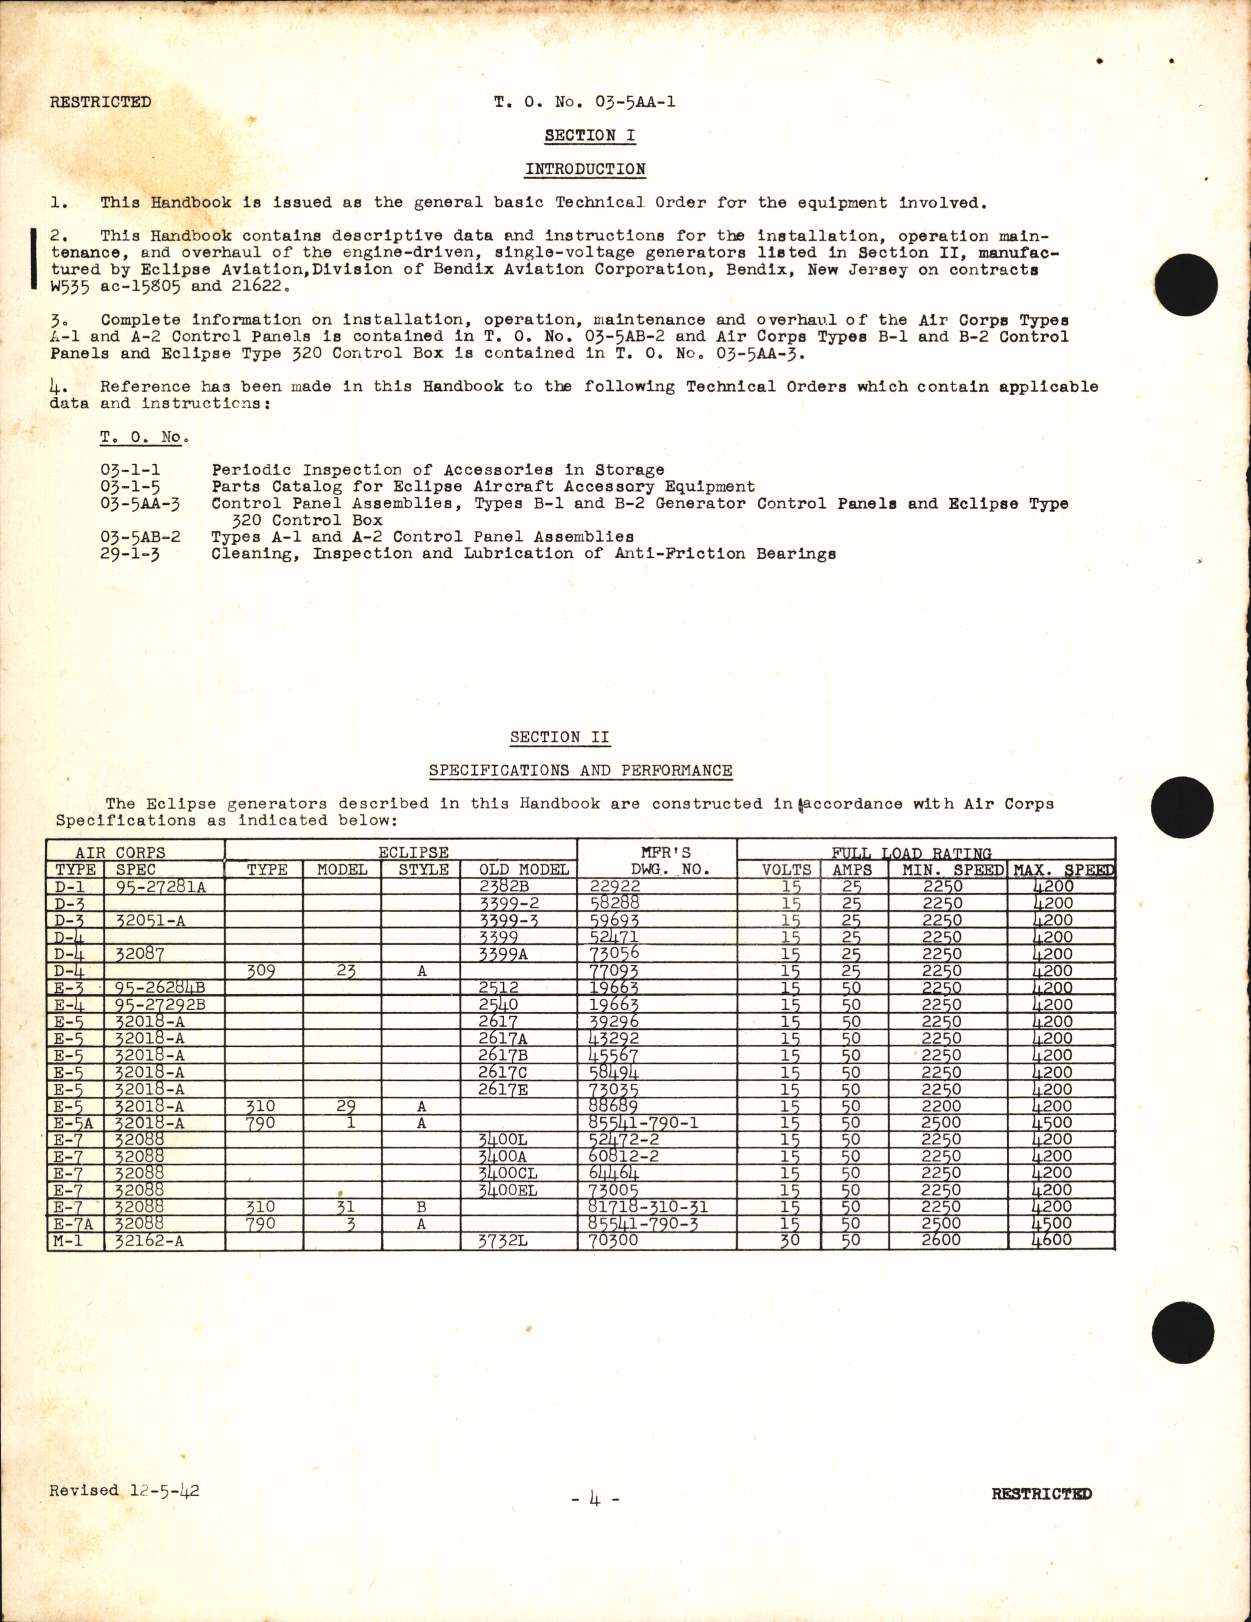 Sample page 6 from AirCorps Library document: Handbook of Instructions for Aircraft Engine Generators and Control Boxes